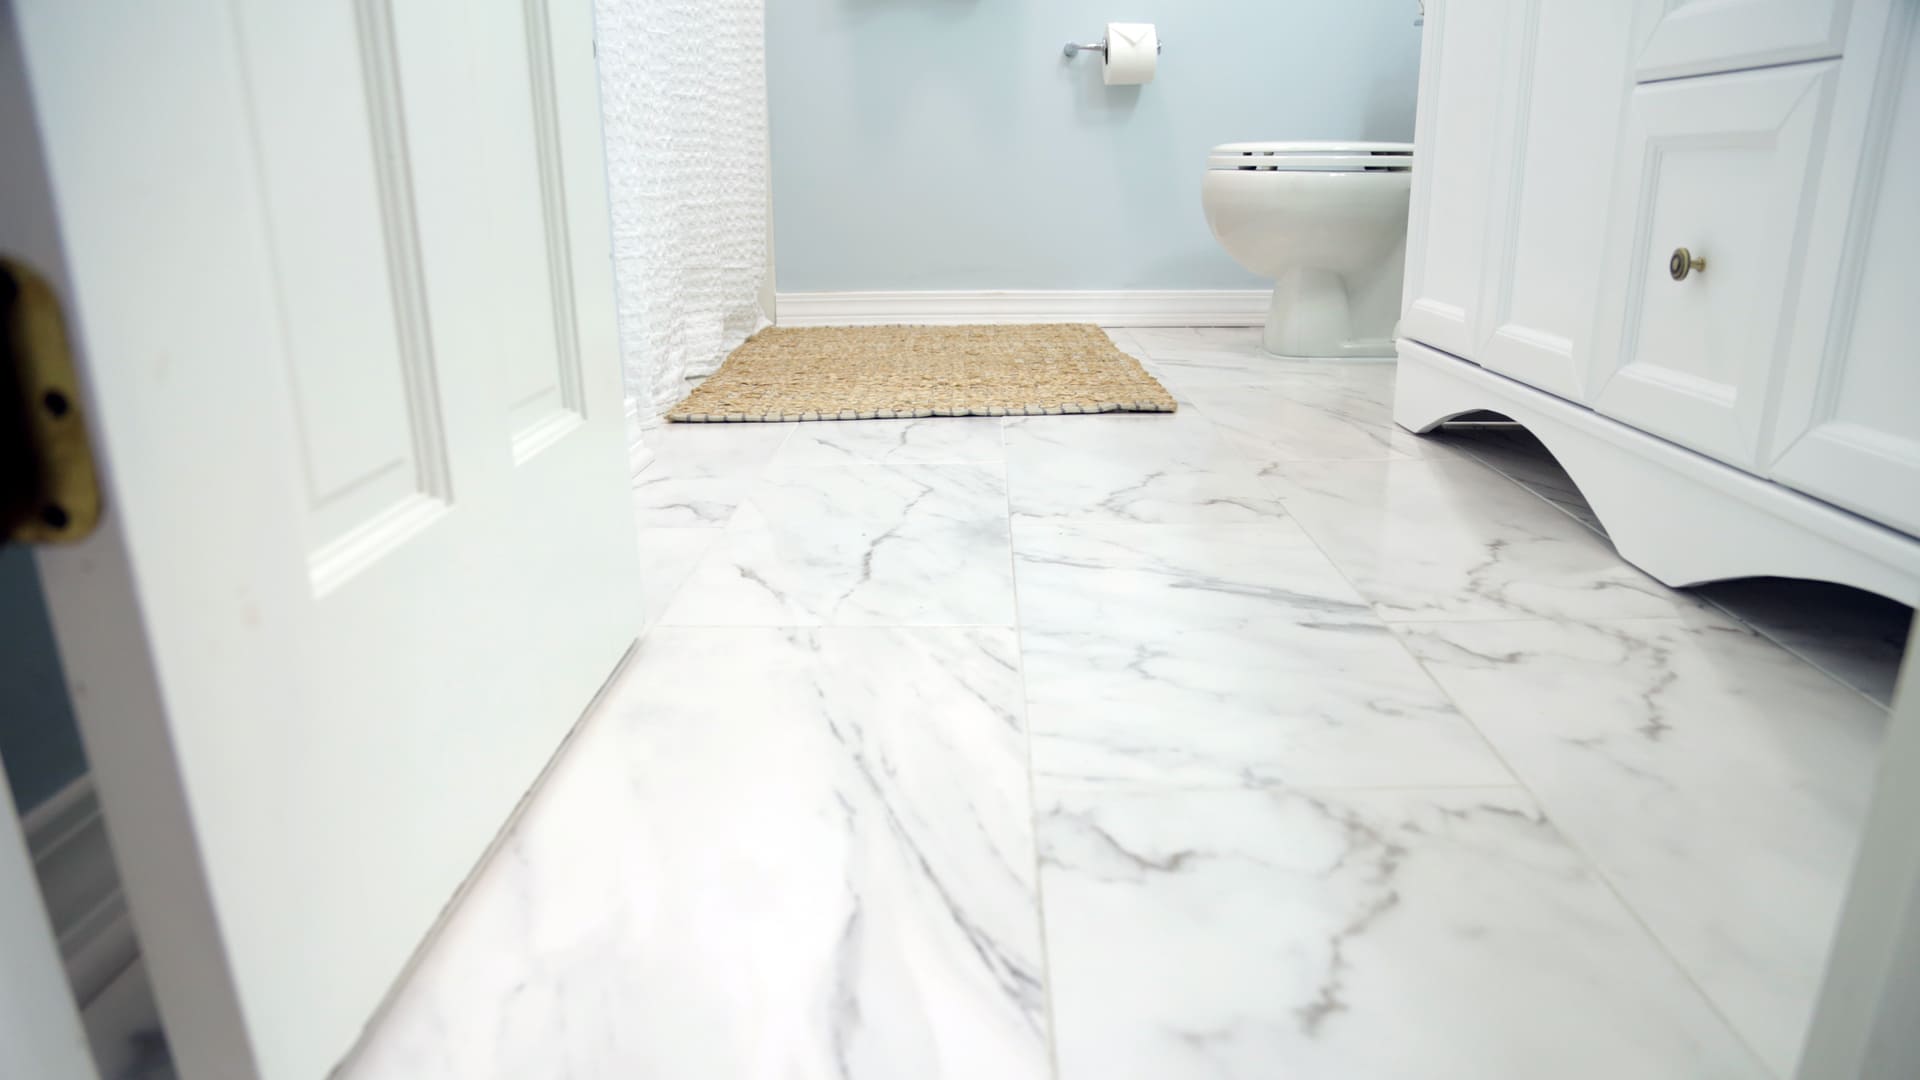 How To Lay Ceramic Tile On A Floor, Which Is Better For Bathroom Ceramic Or Porcelain Tile